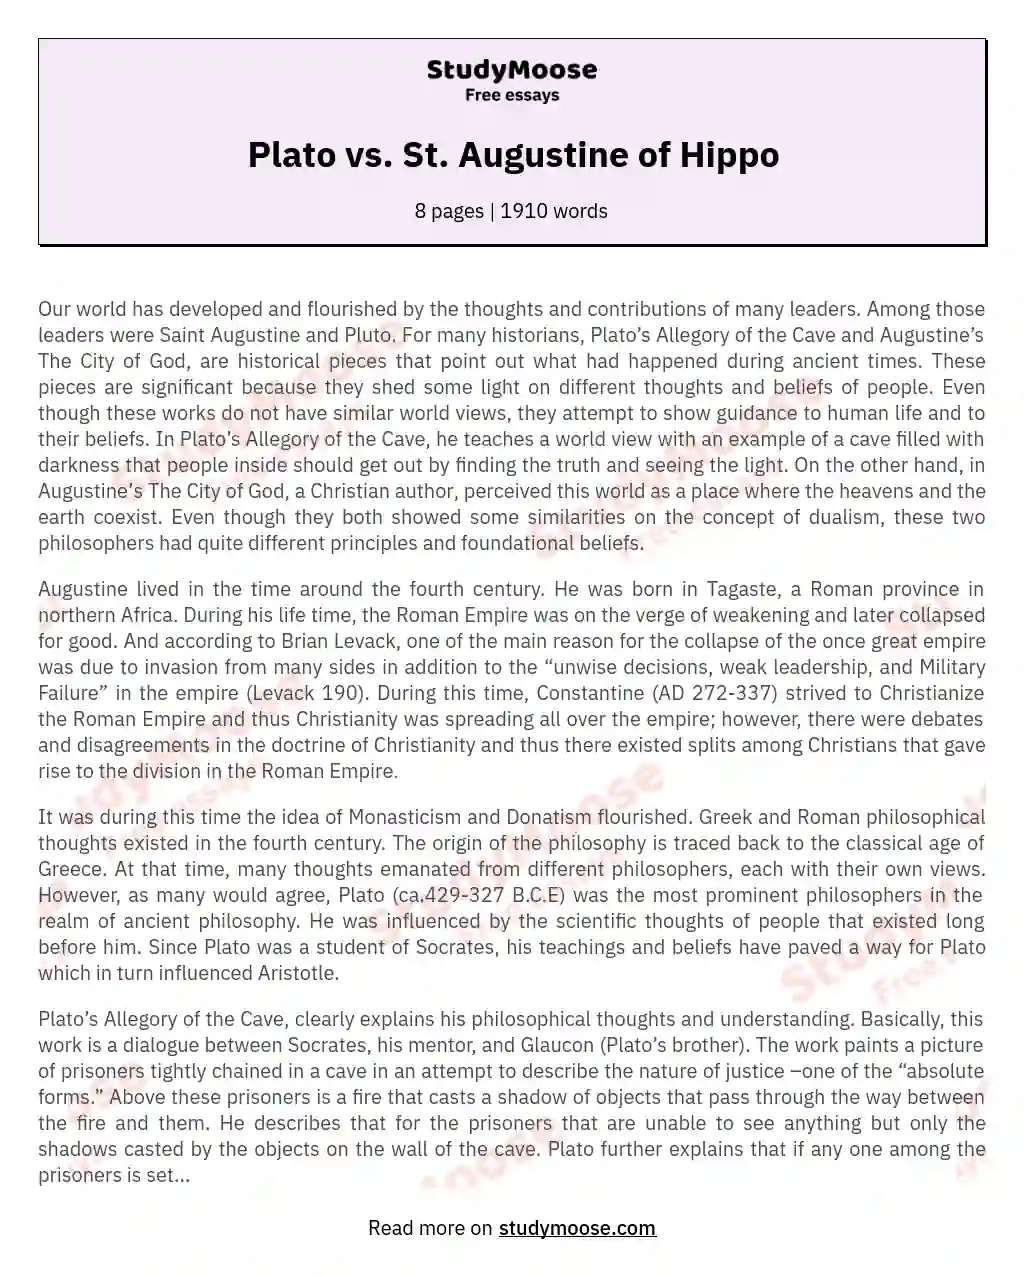 compare the concept of man between plato and st augustine